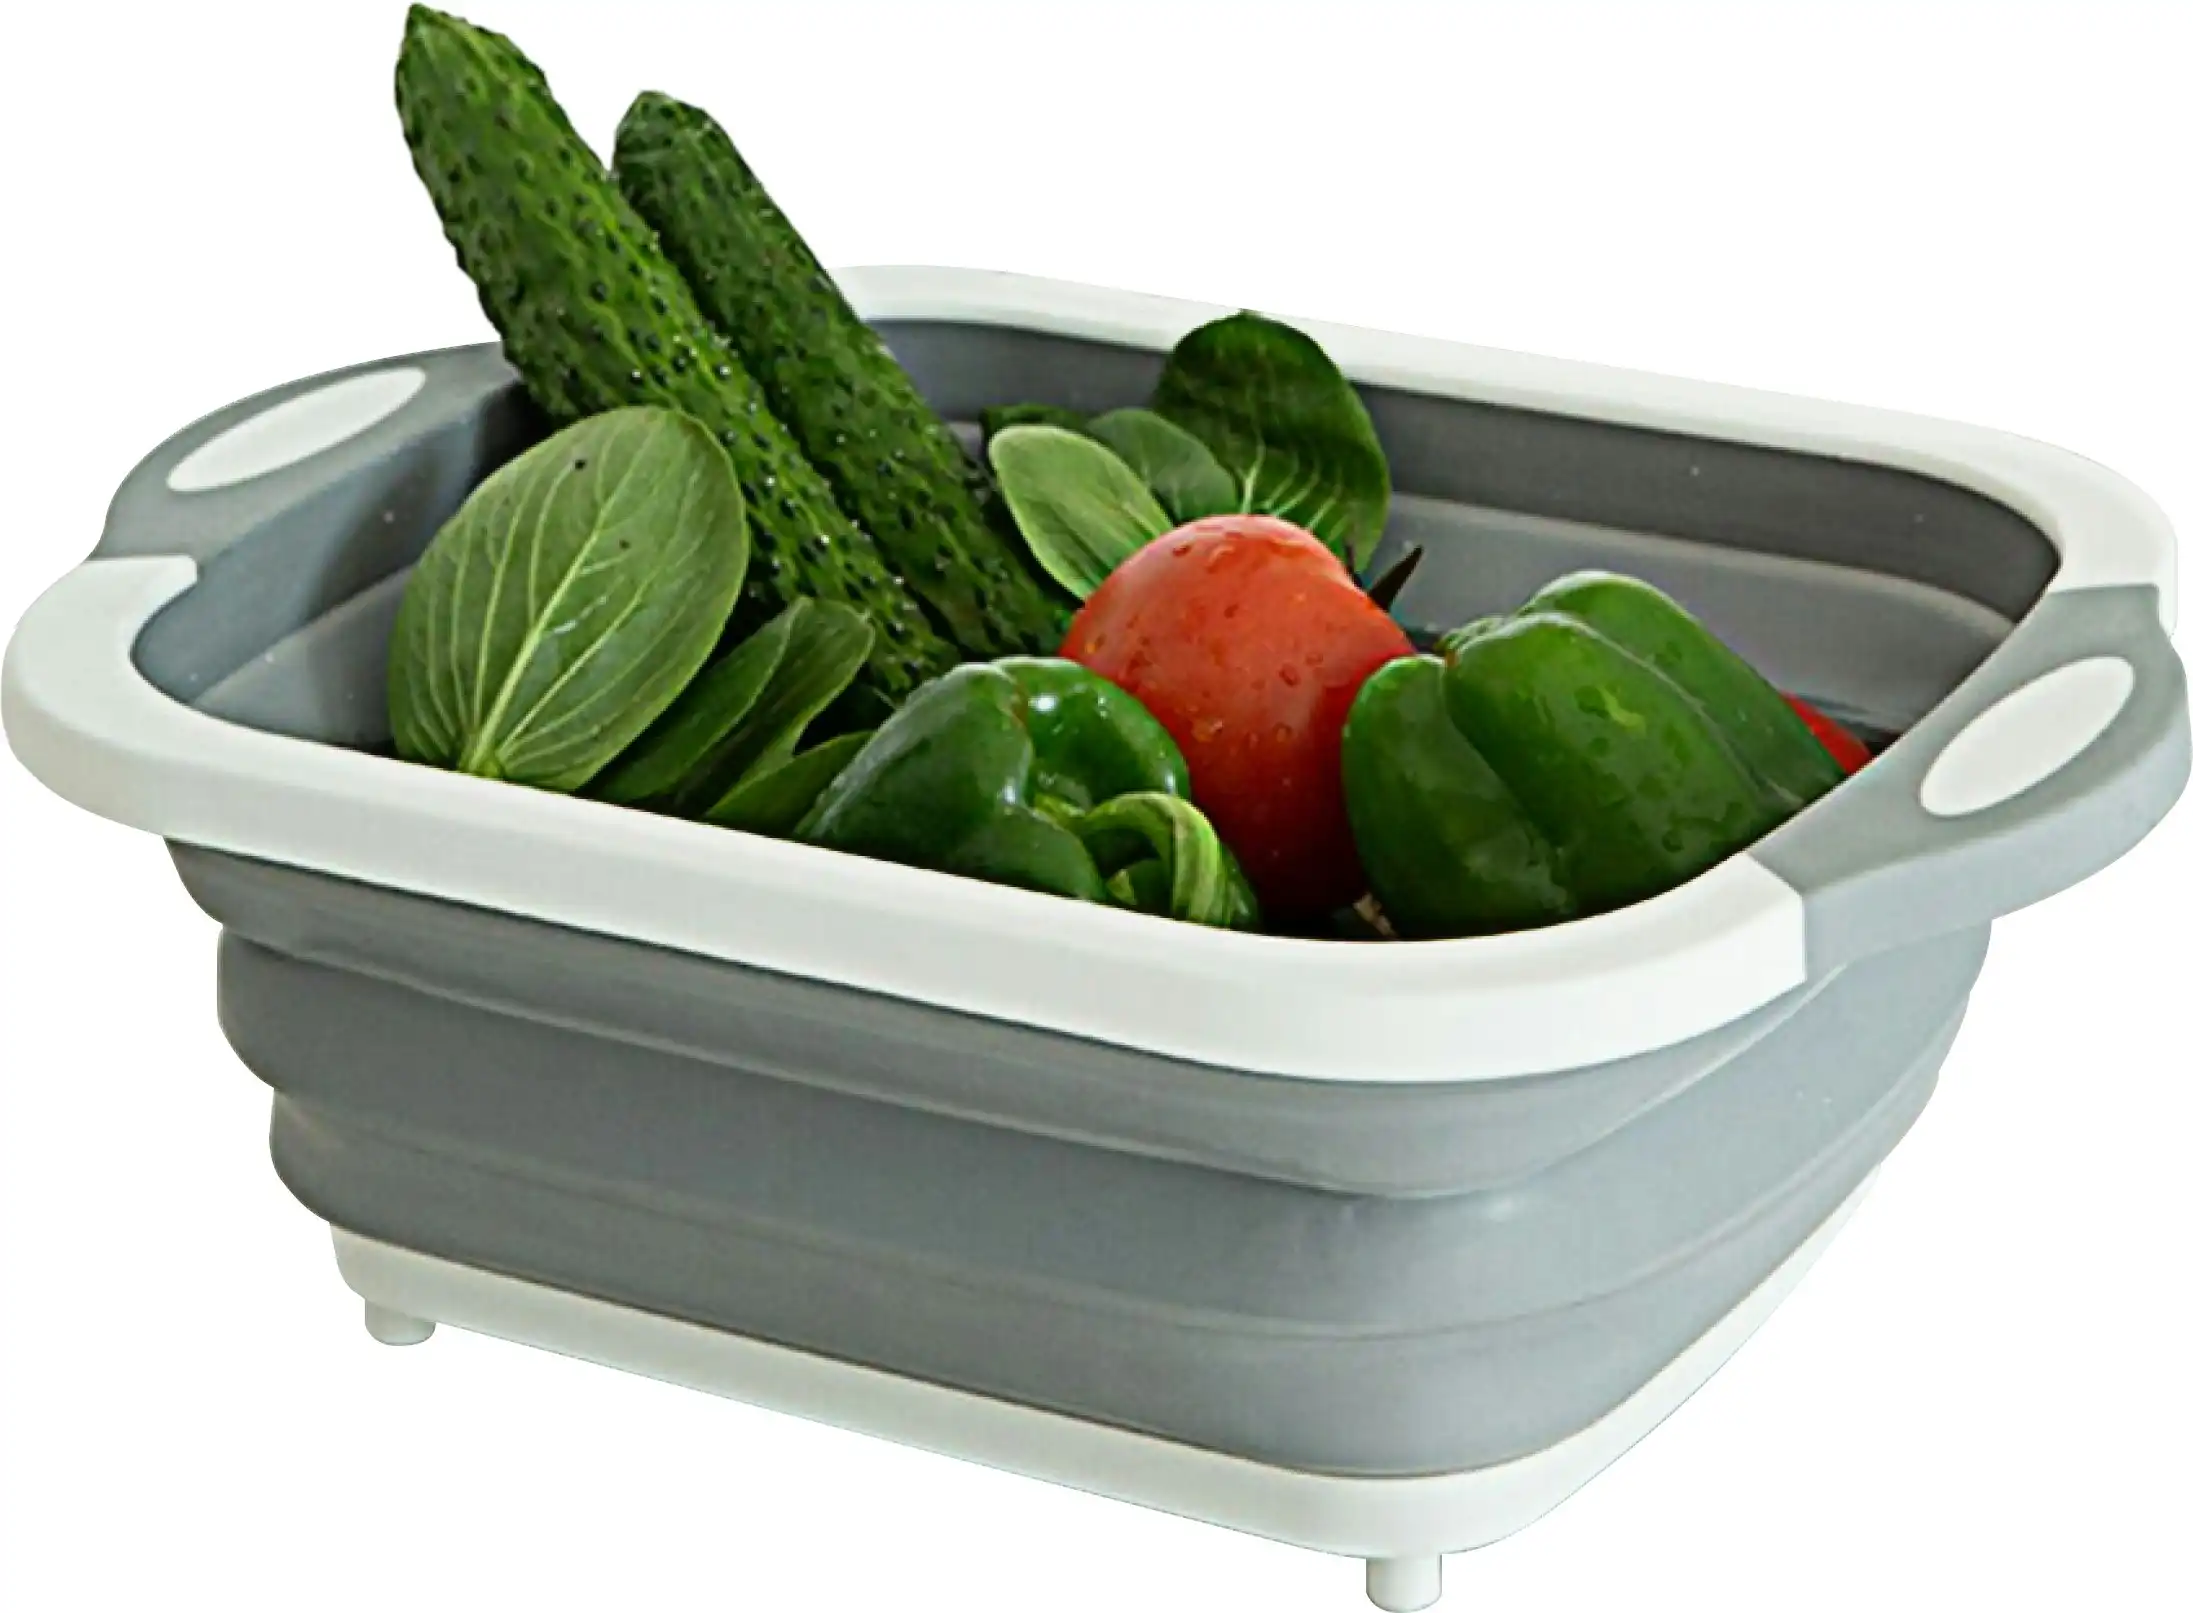 Collapsible 2 in 1 Sink & Chopping Board